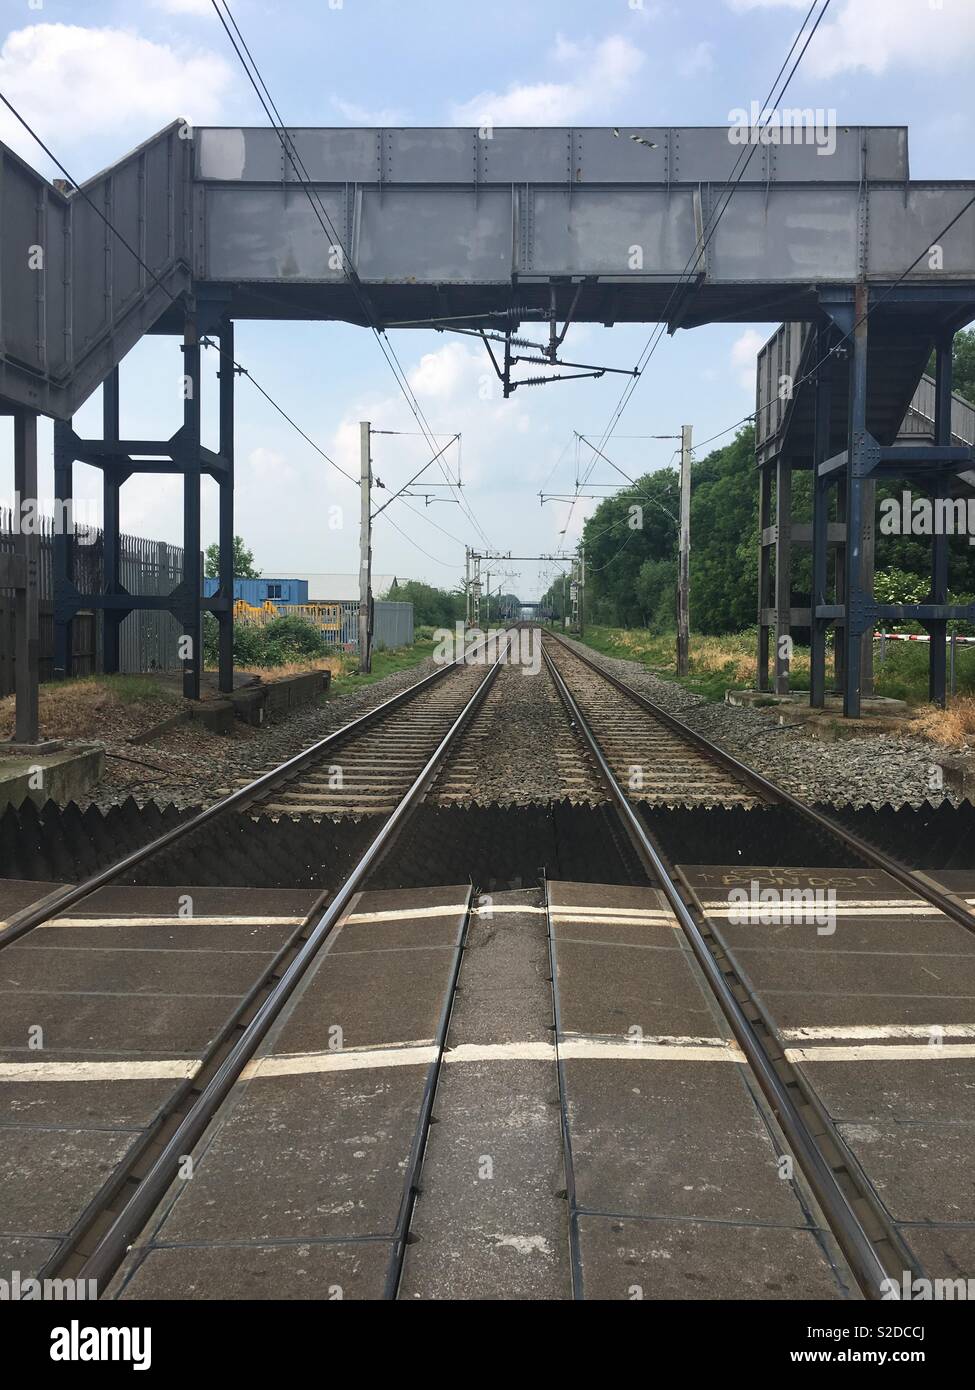 View along the train tracks from the middle of a level crossing, Waltham Cross, Cheshunt, UK Stock Photo